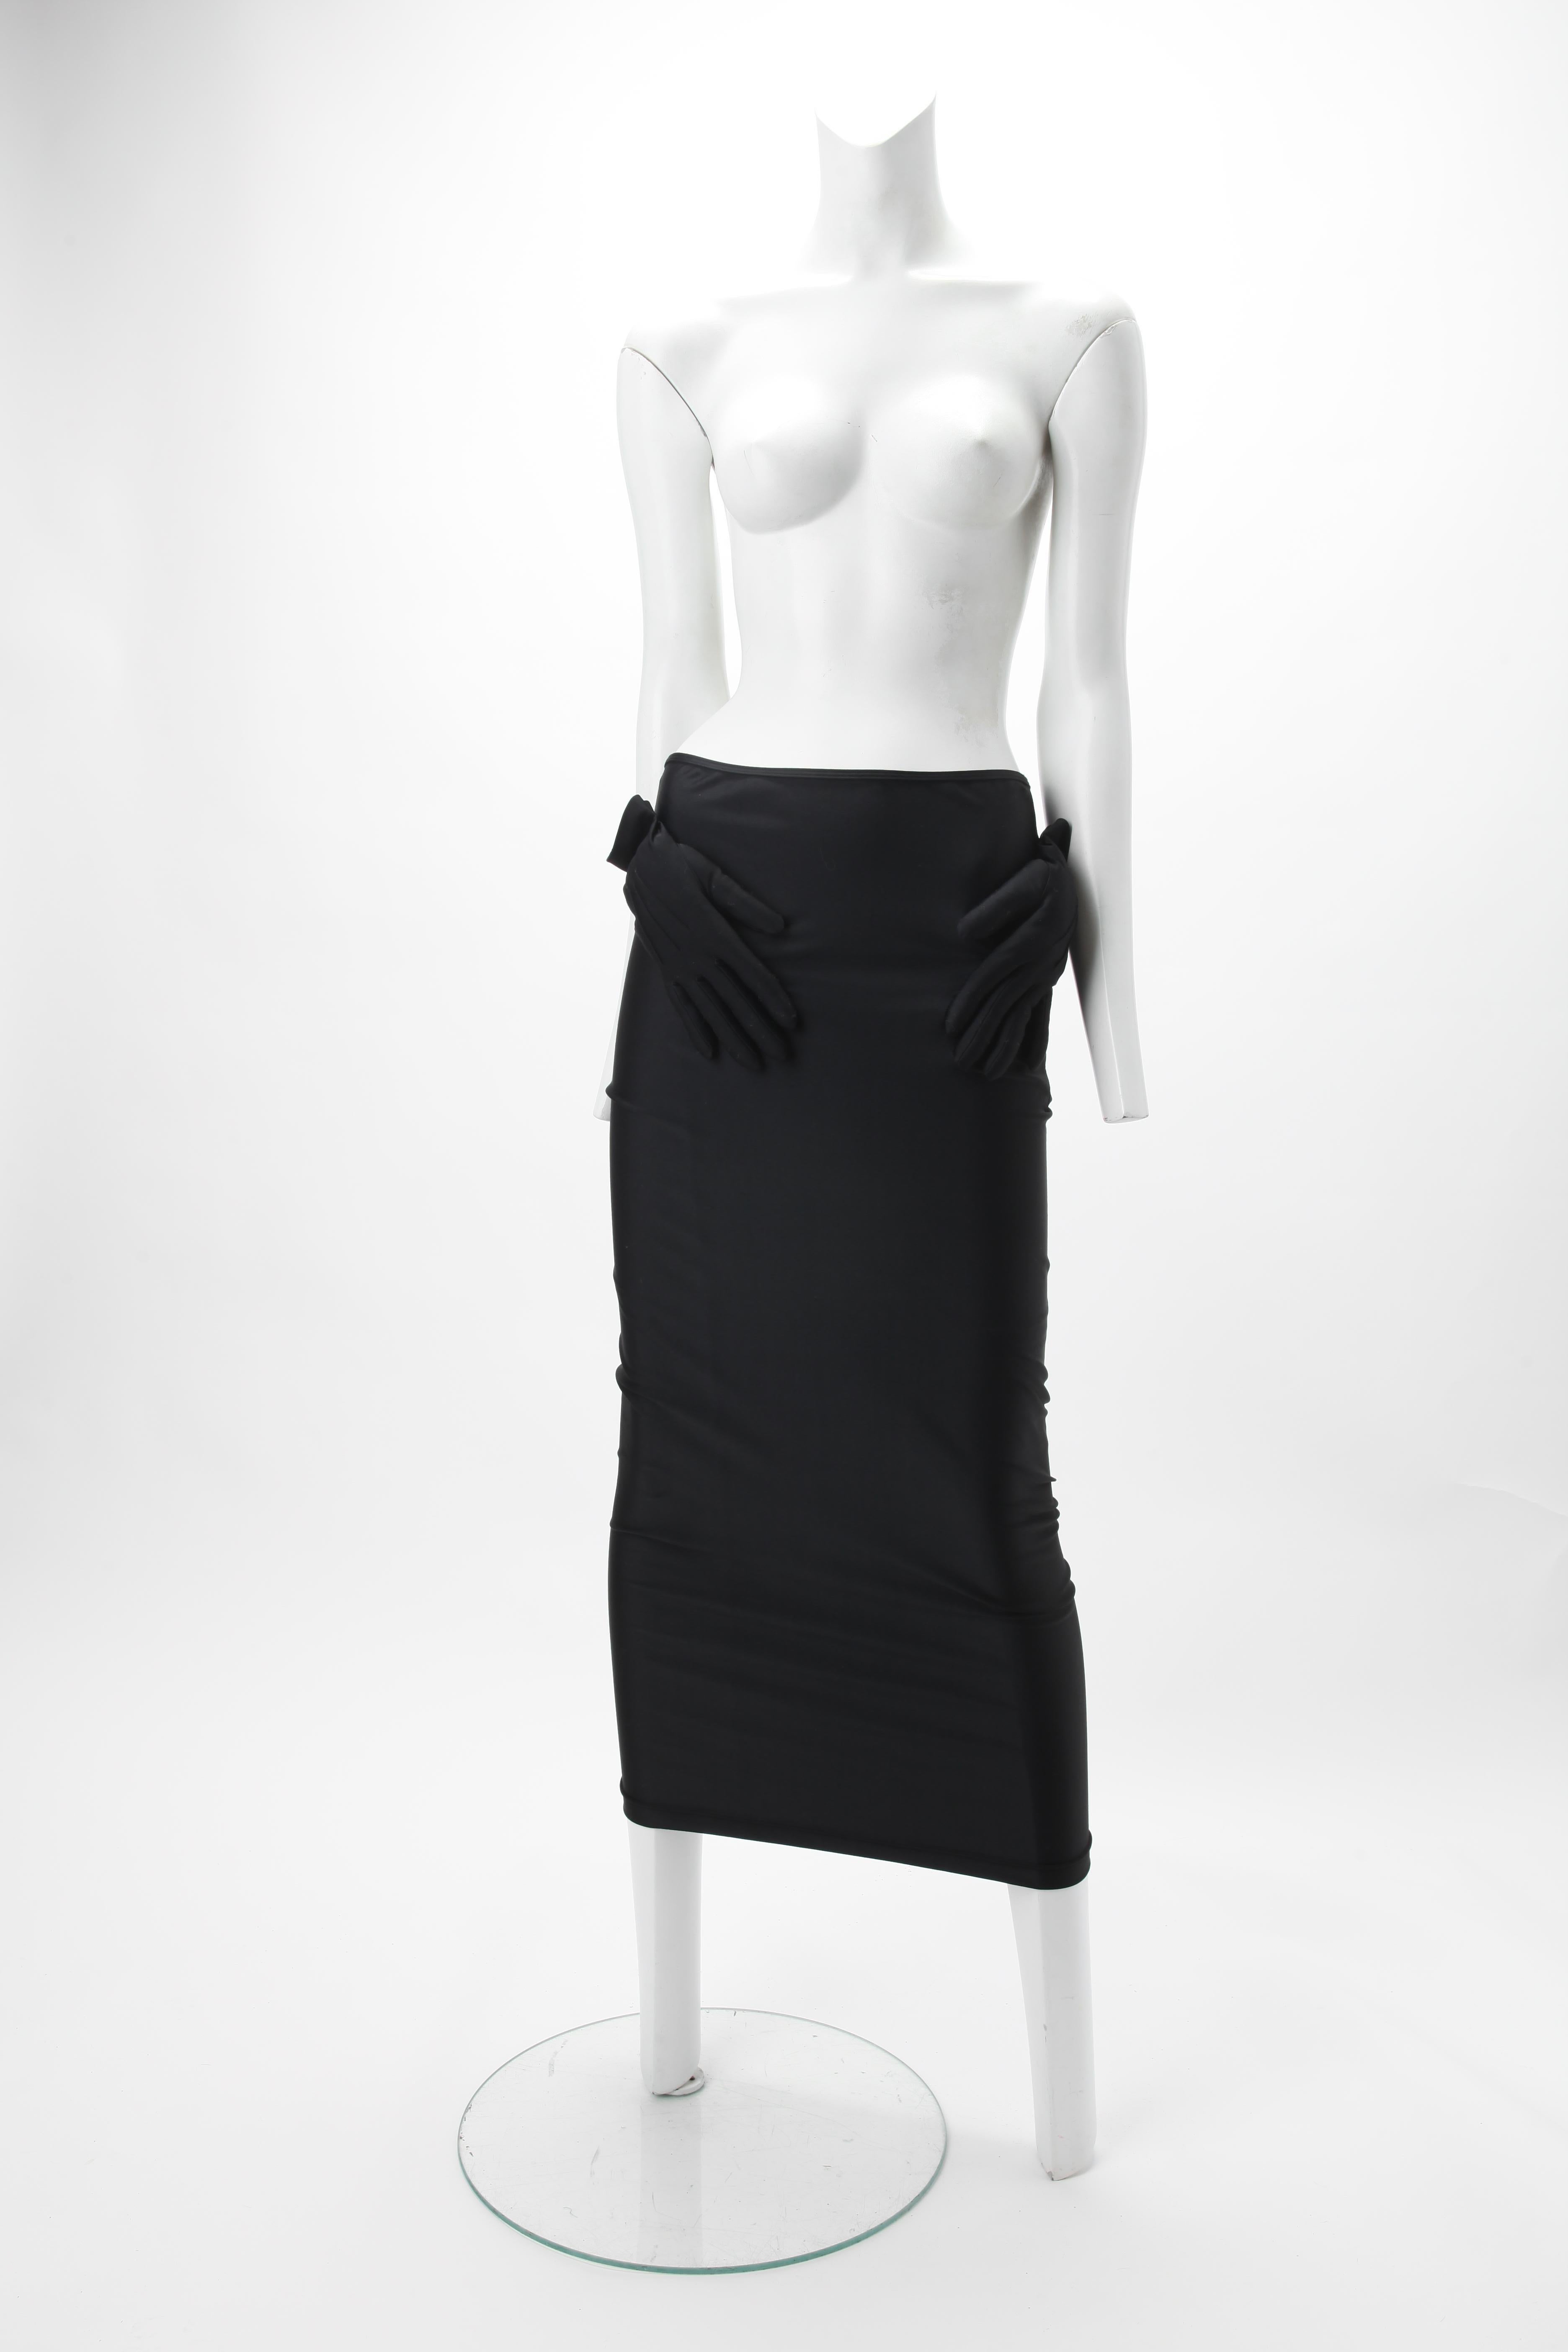 ICONIC Comme des Garcons FW 2007 Black Skirt with Padded 